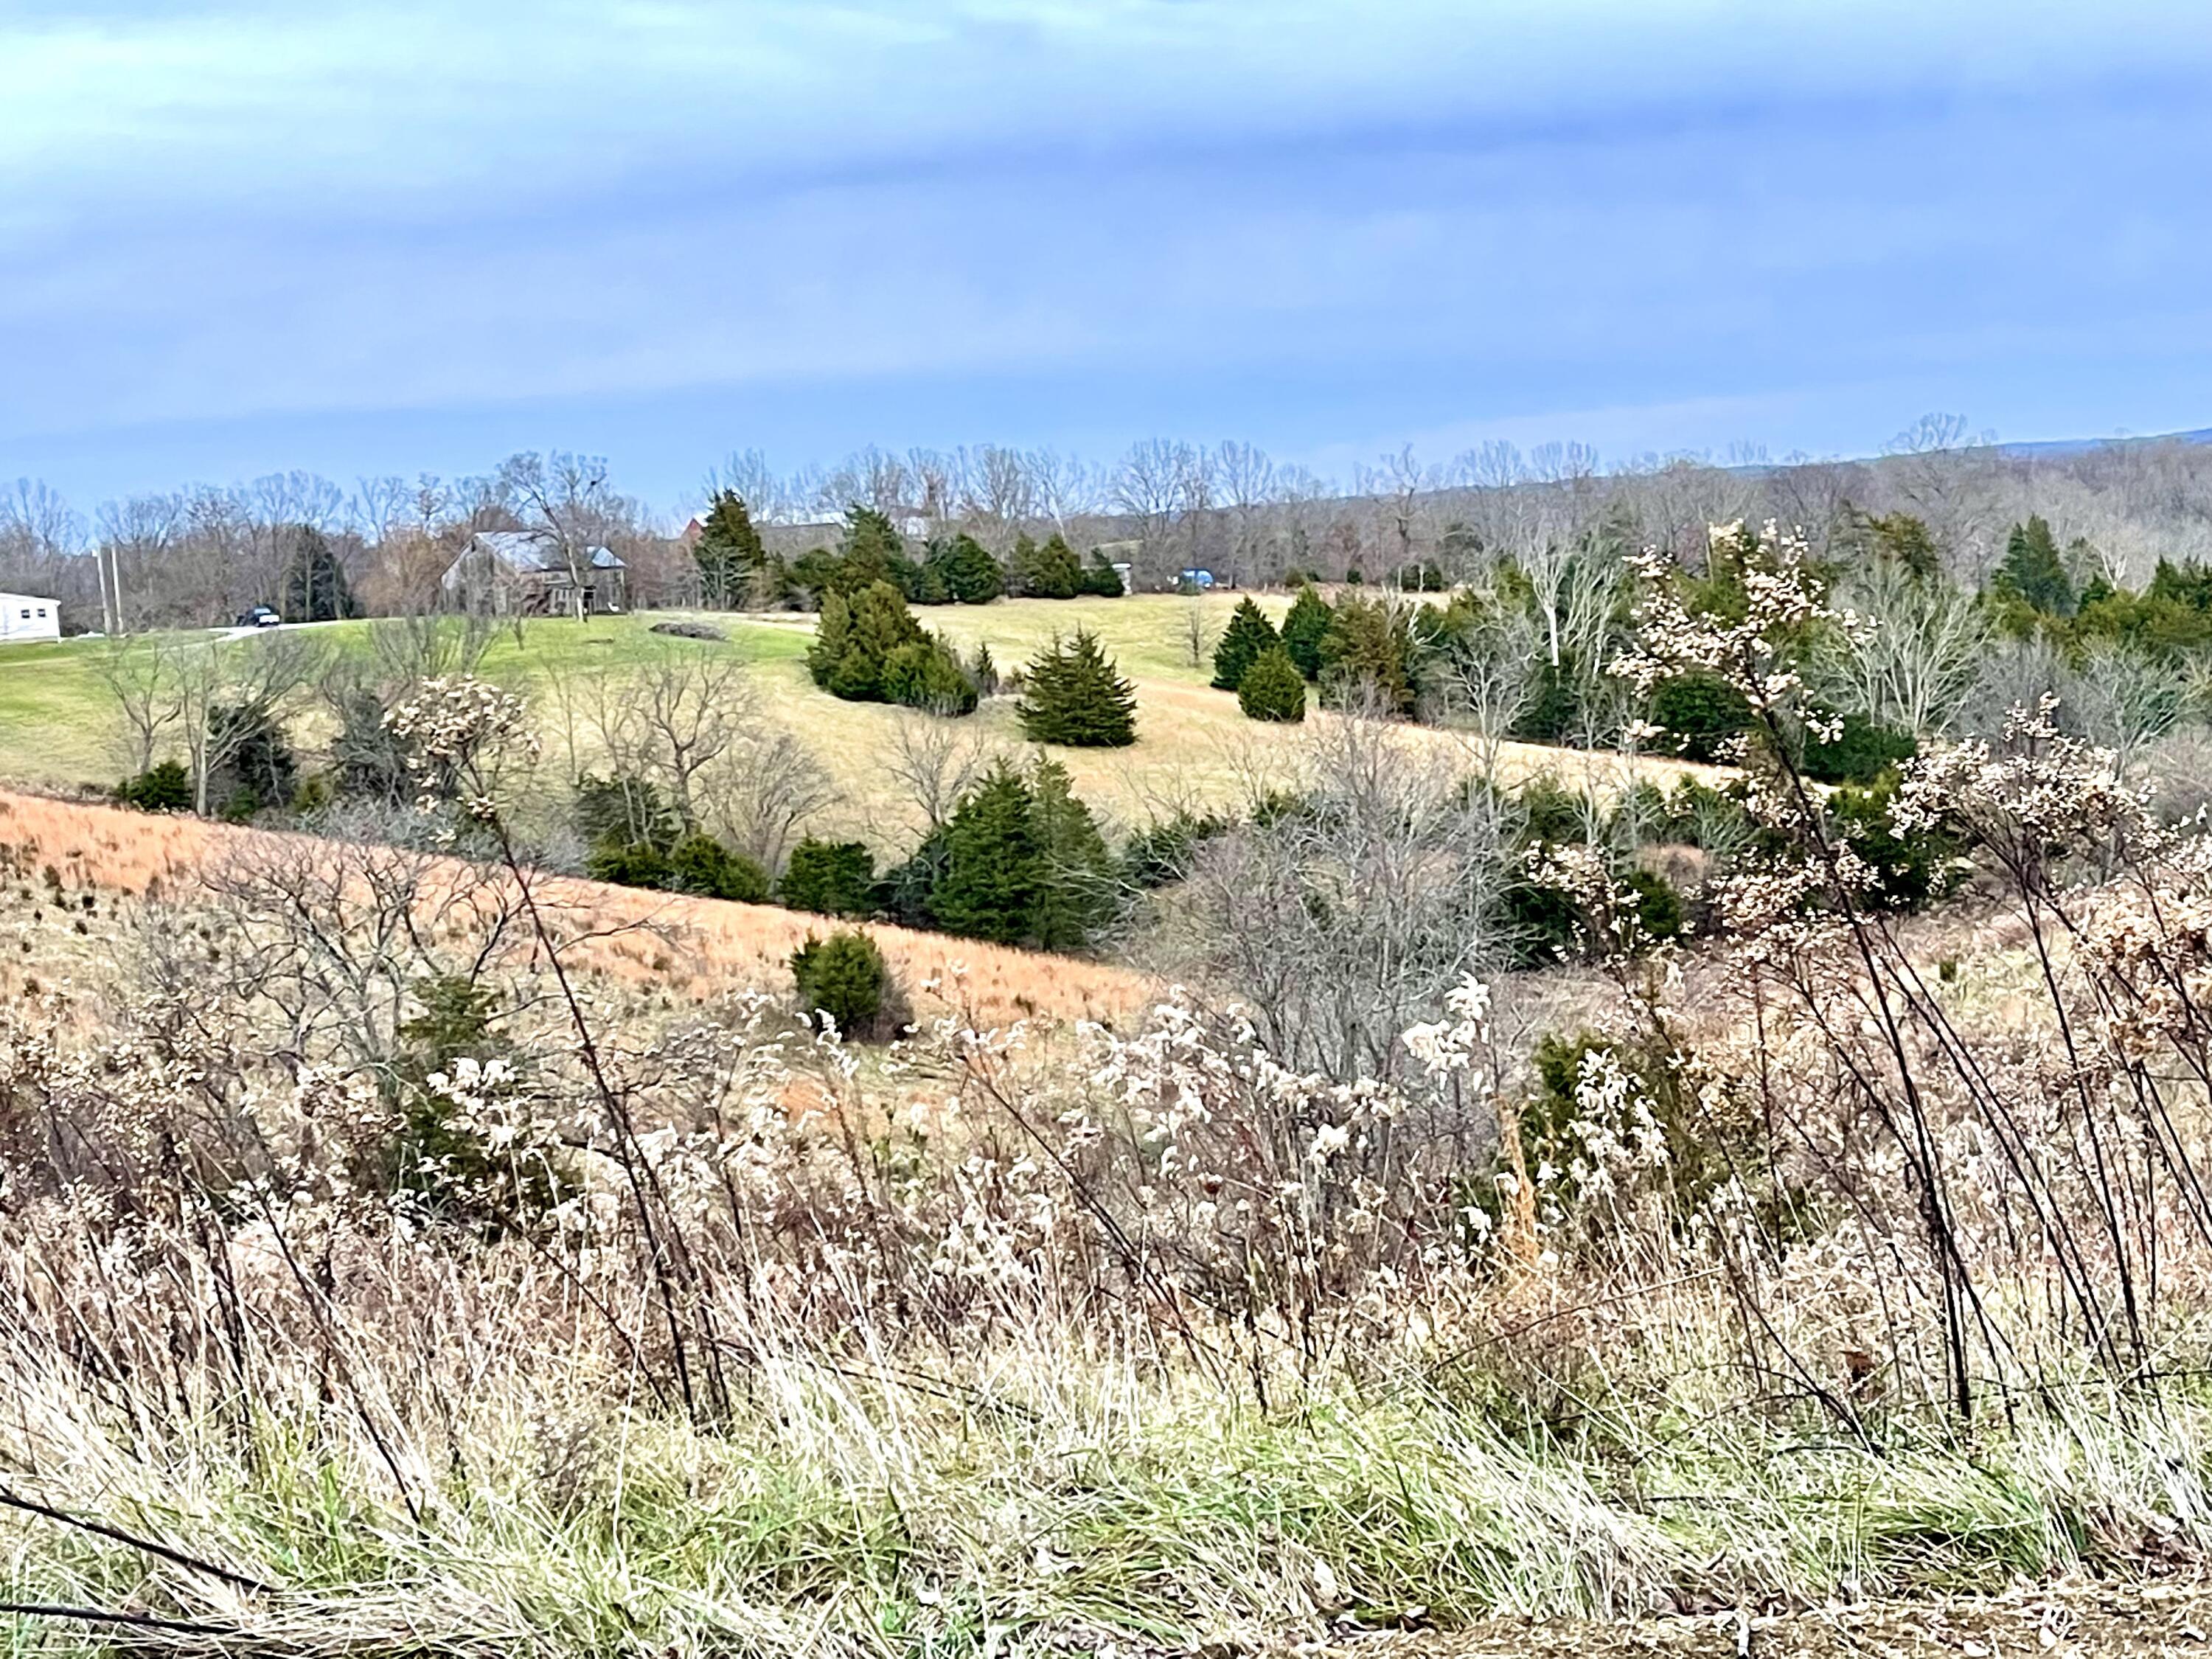 1-A KY HWY 36 W, Berry, KY 41003 - MLS#: 22025693